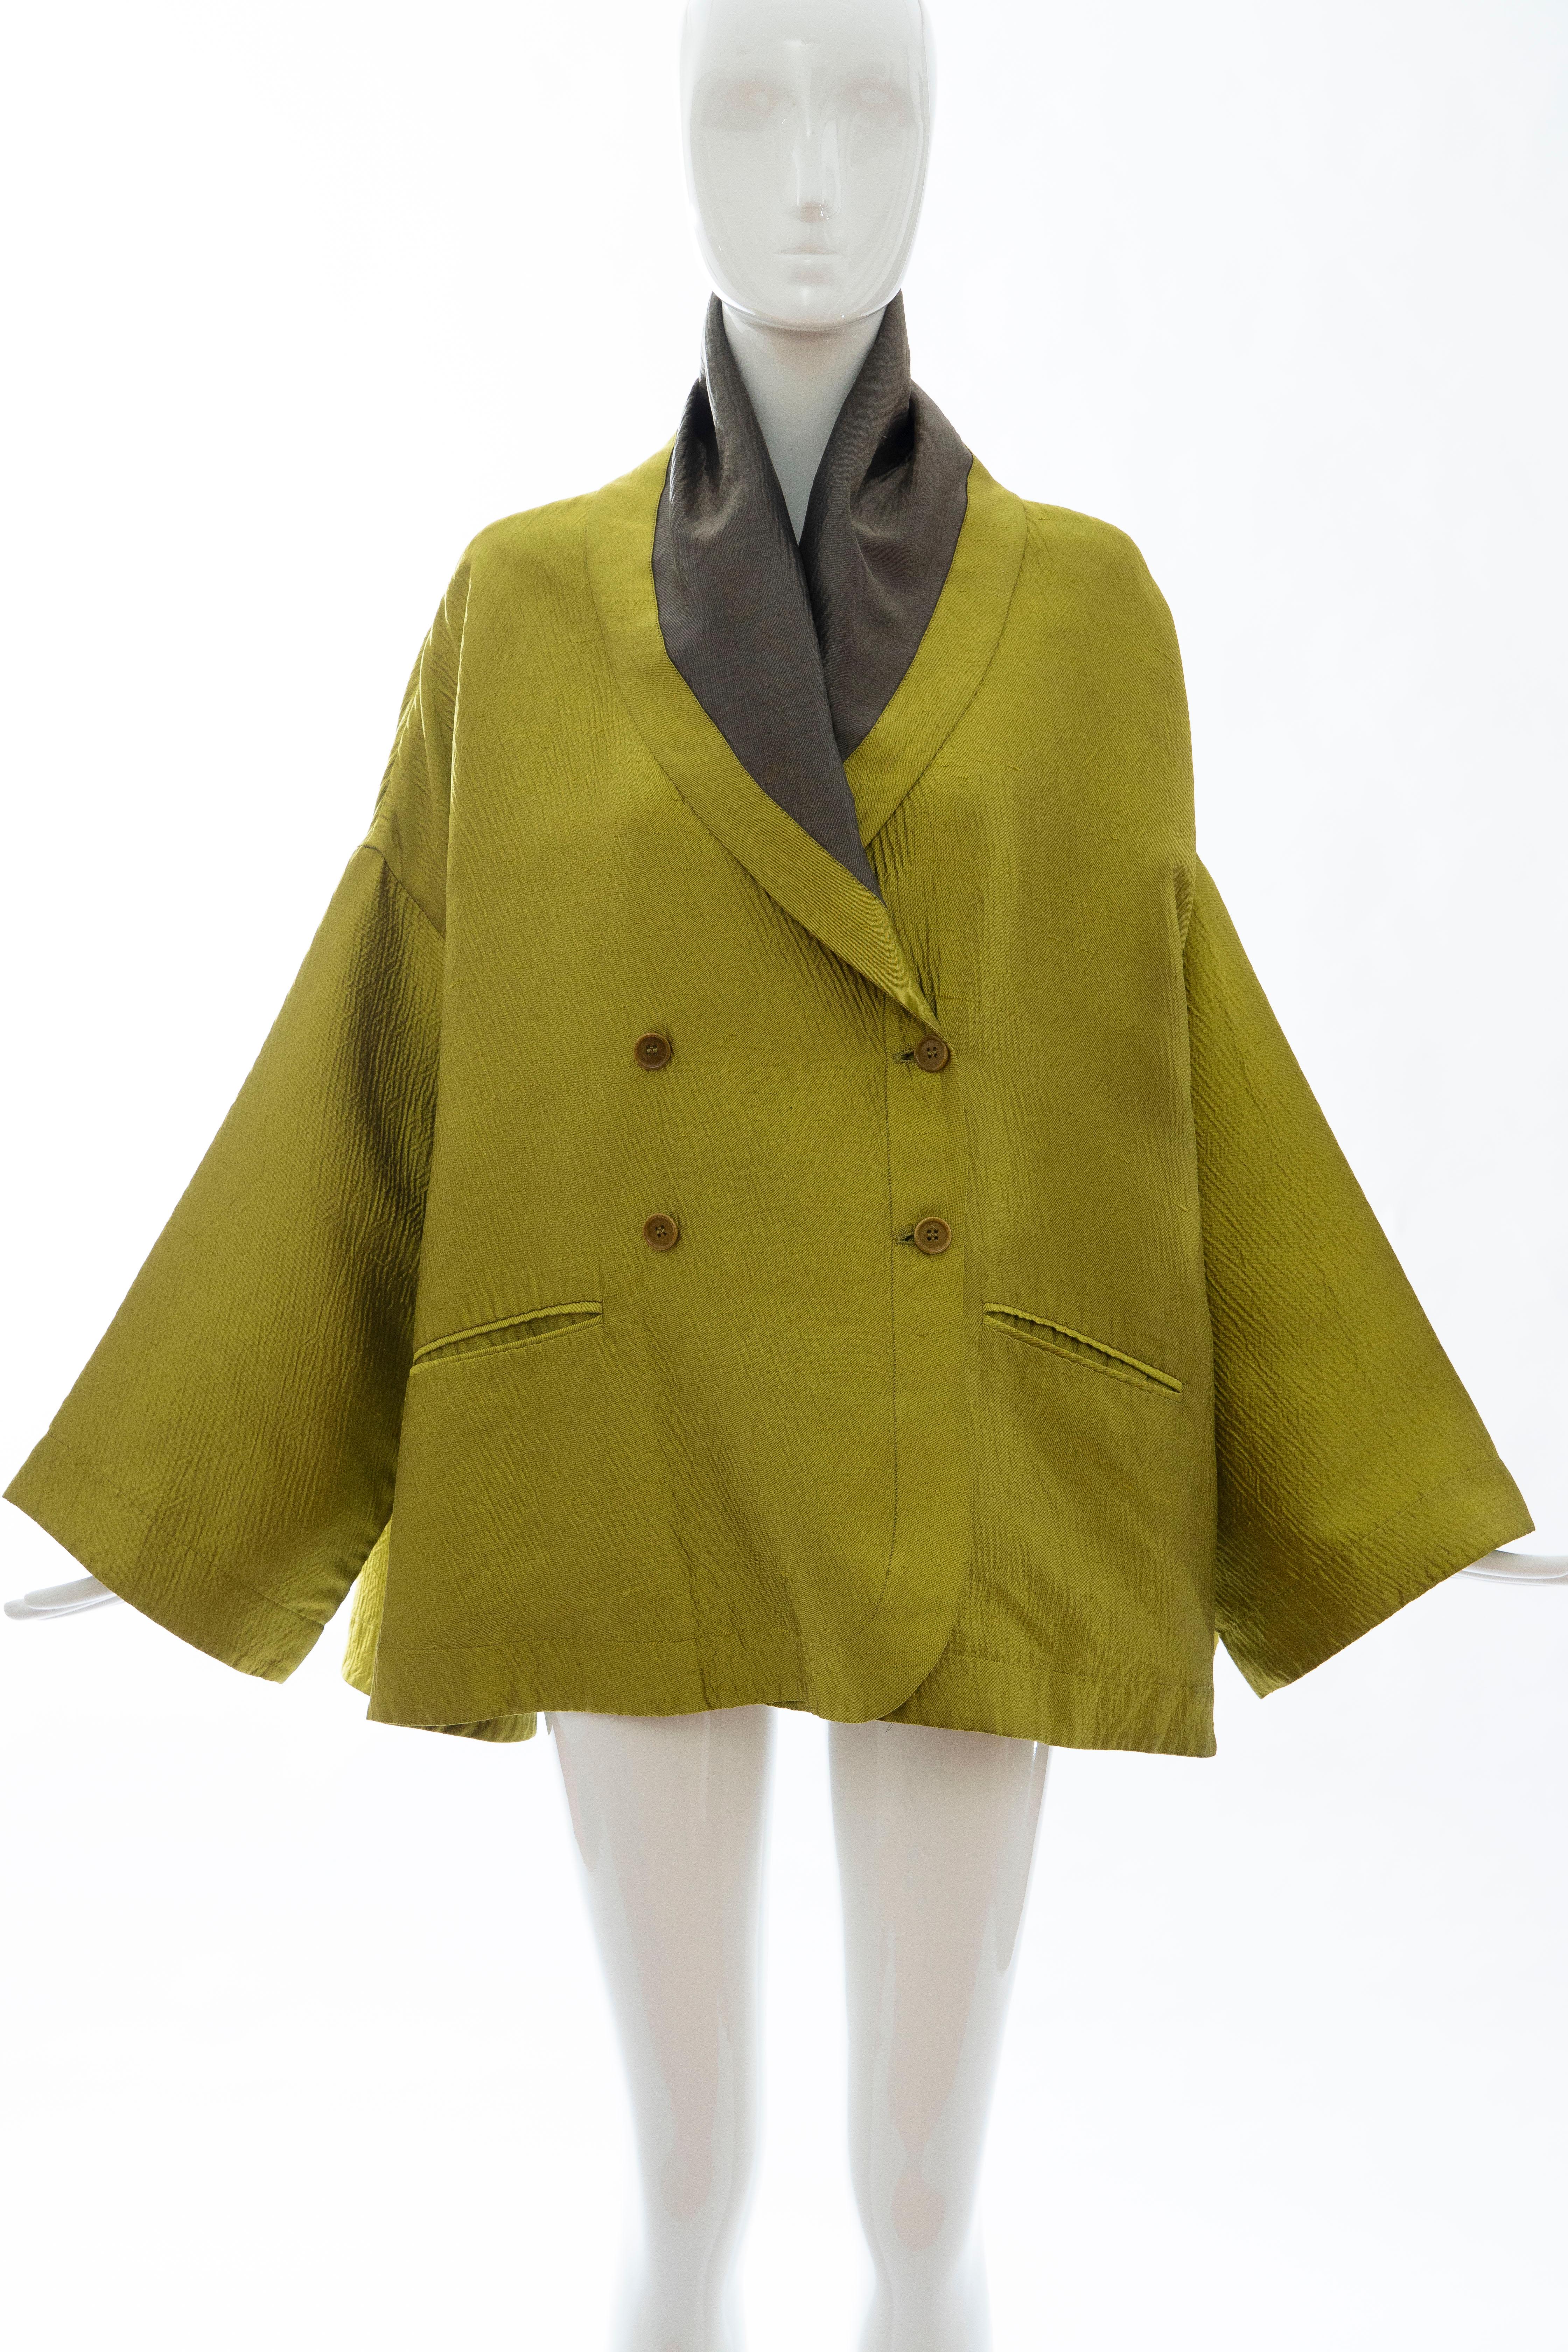 Romeo Gigli Runway Fall 1991, silk, cotton chartreuse green double breasted evening jacket with two front pockets.

IT. 40, US. 4
Bust: 58, Waist: 62, Hip: 78, Length: 29